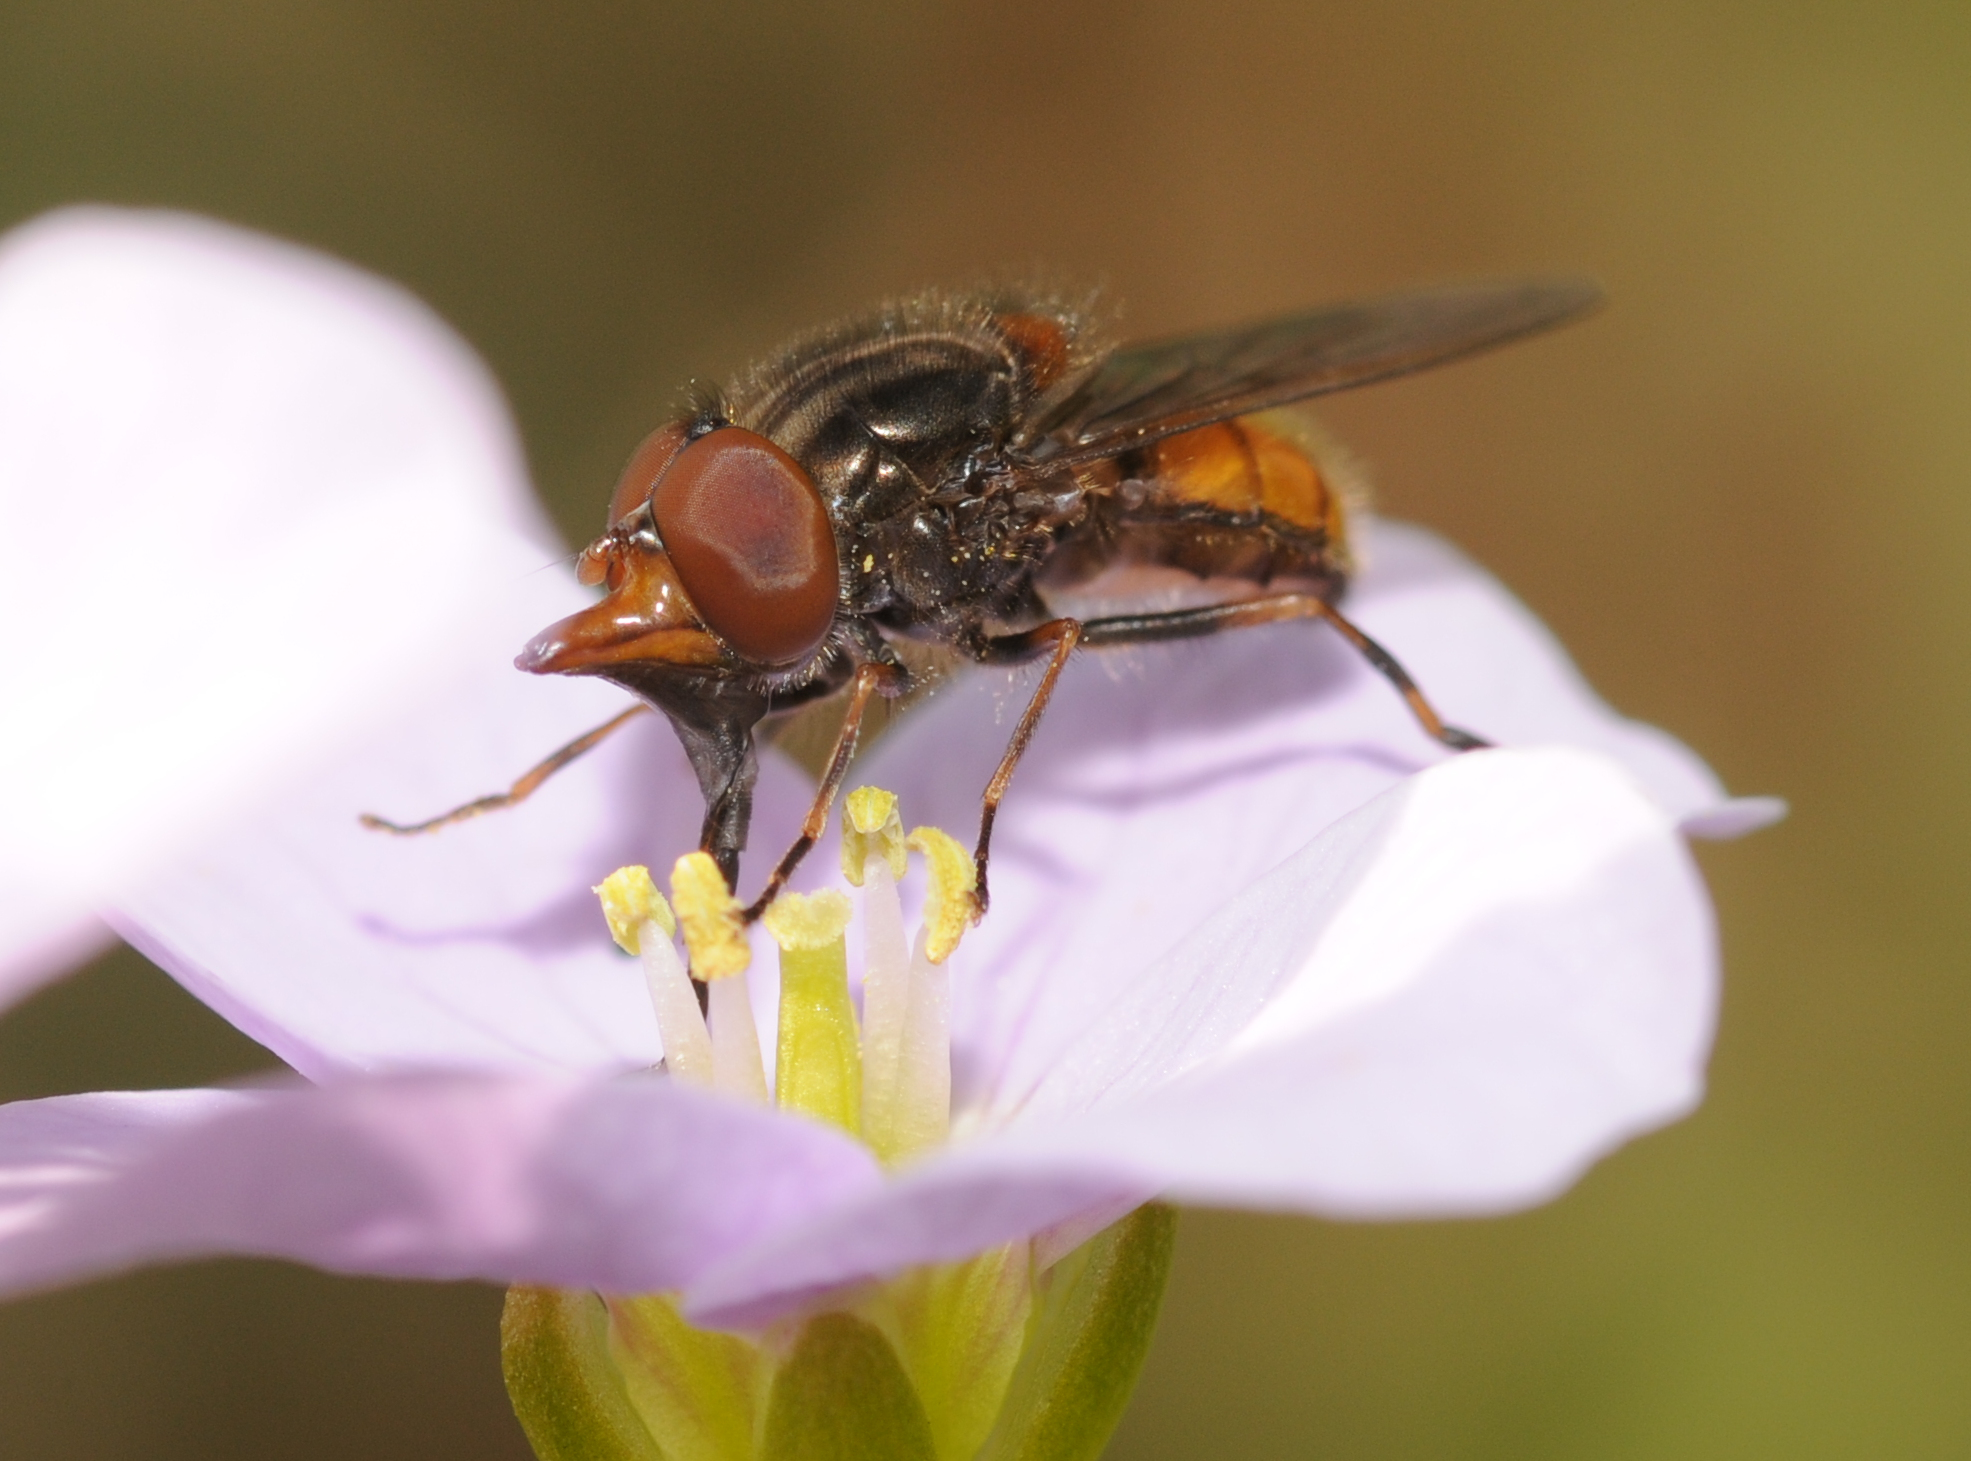 a close up of a fly on a flower